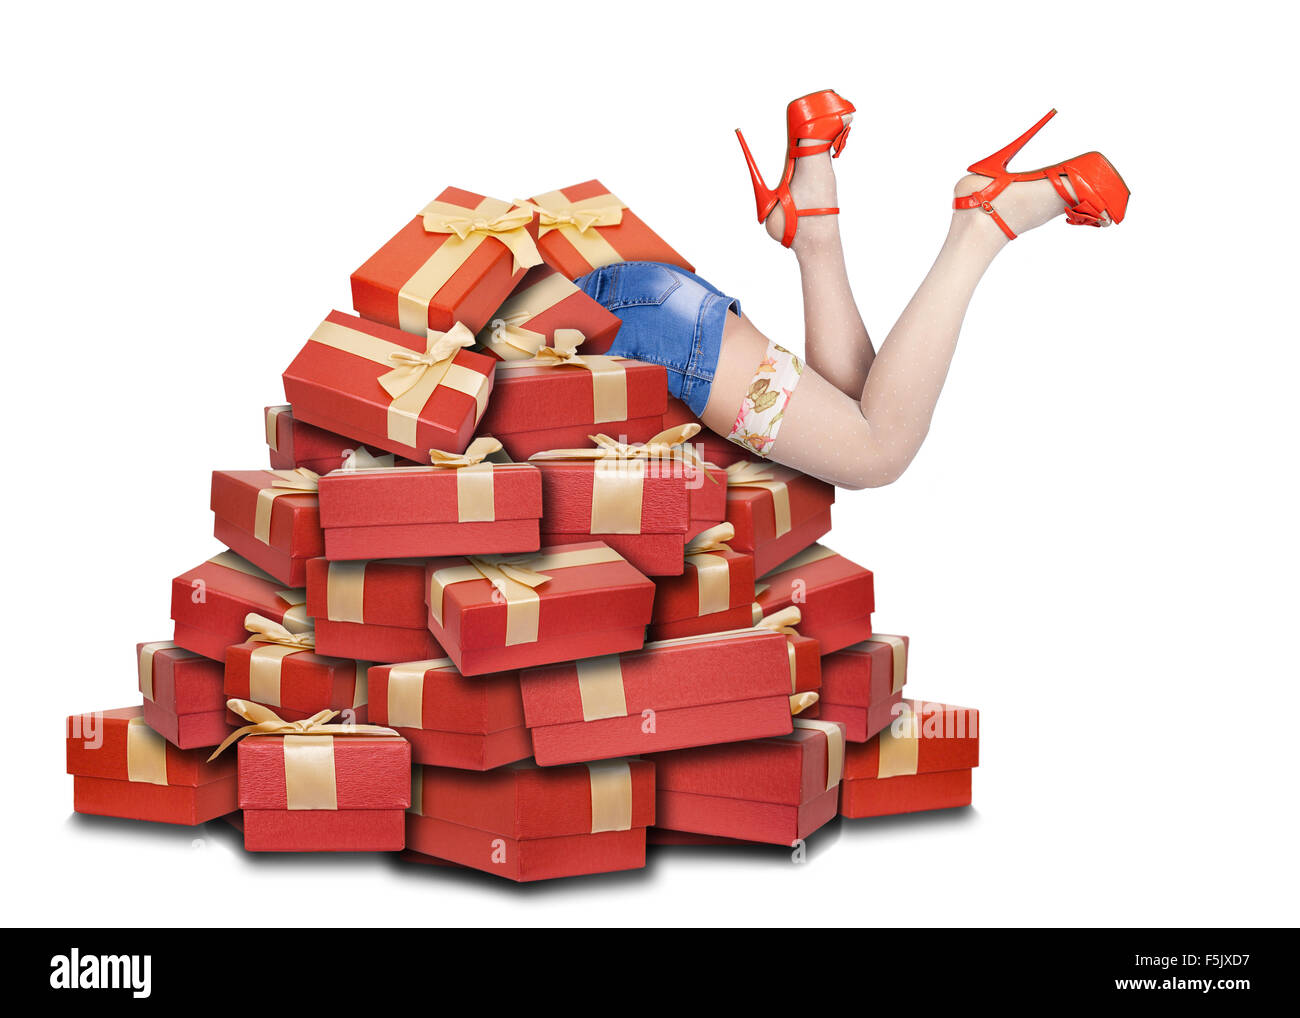 woman's legs sticking out from a pile of gift boxes Stock Photo